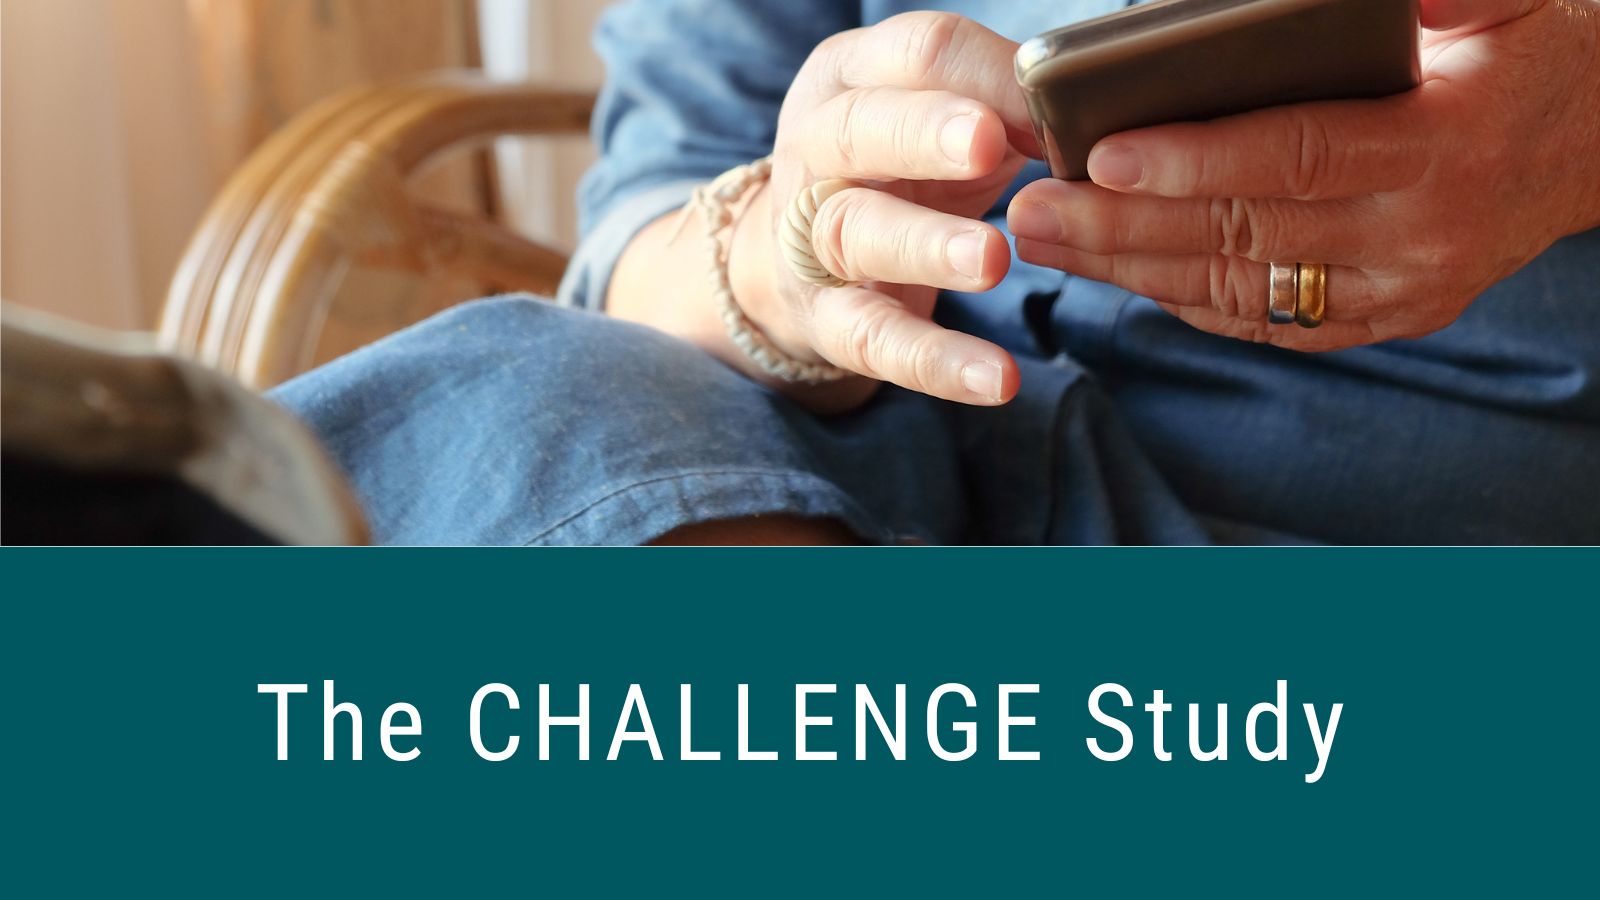 photo of hands holding a cell phone, The CHALLENGE Study